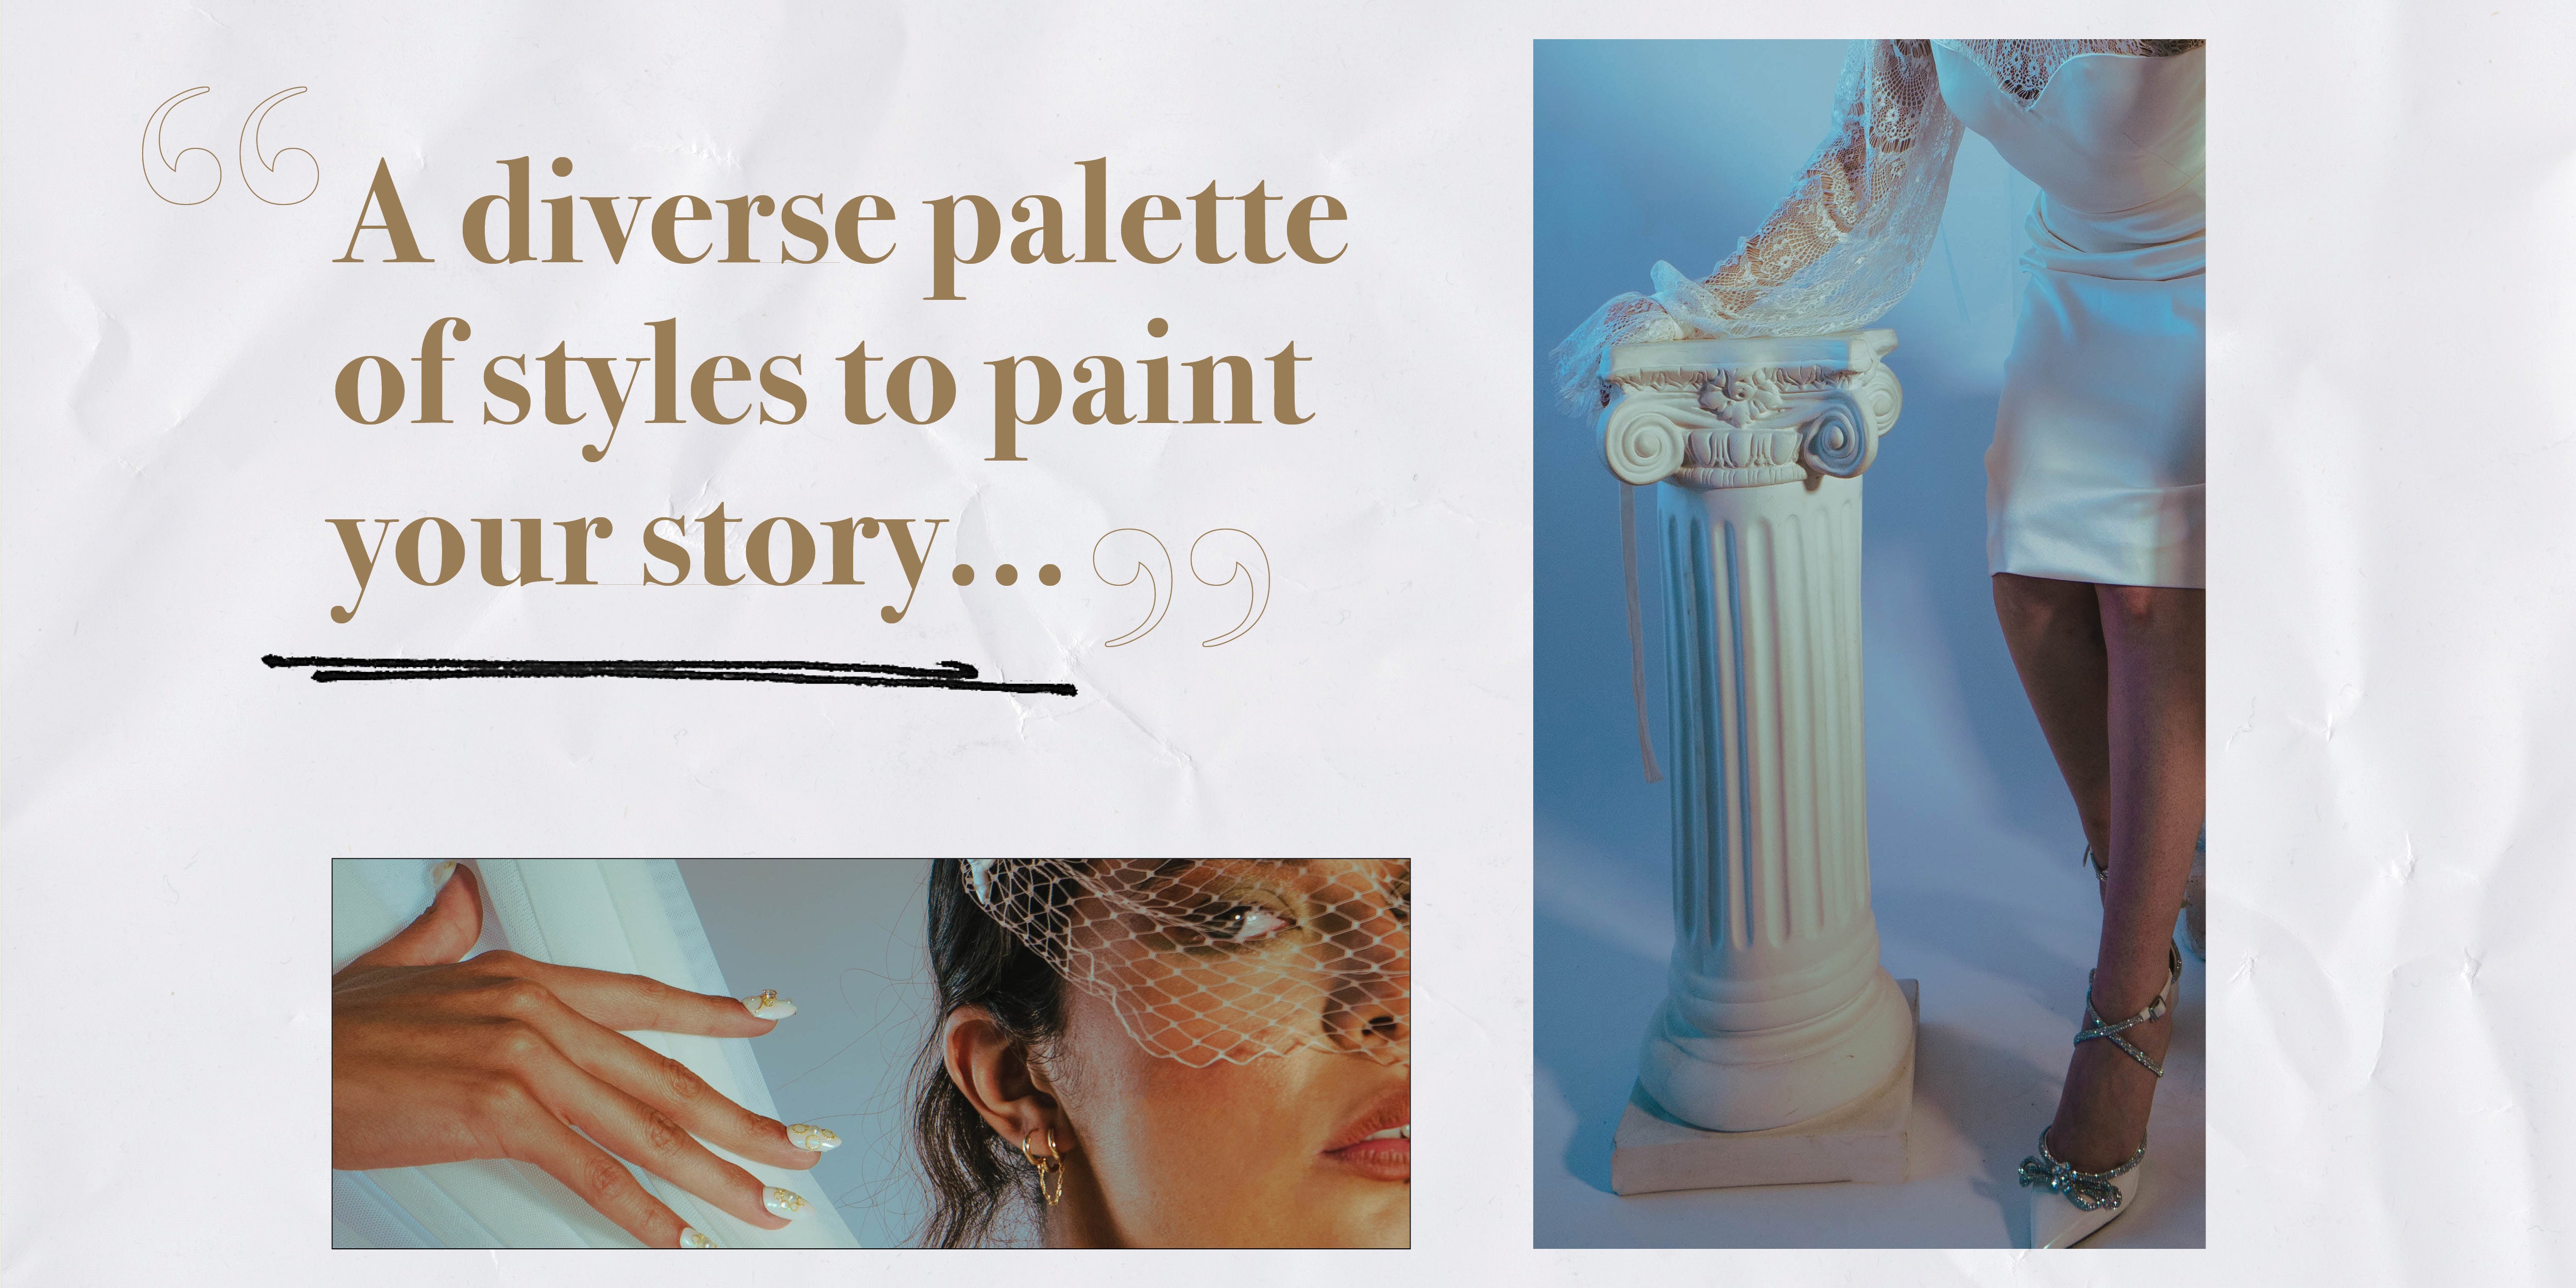 Two model bride shots showing wedding jewelry and a quote that reads "a diverse palette of styles to paint your story..."